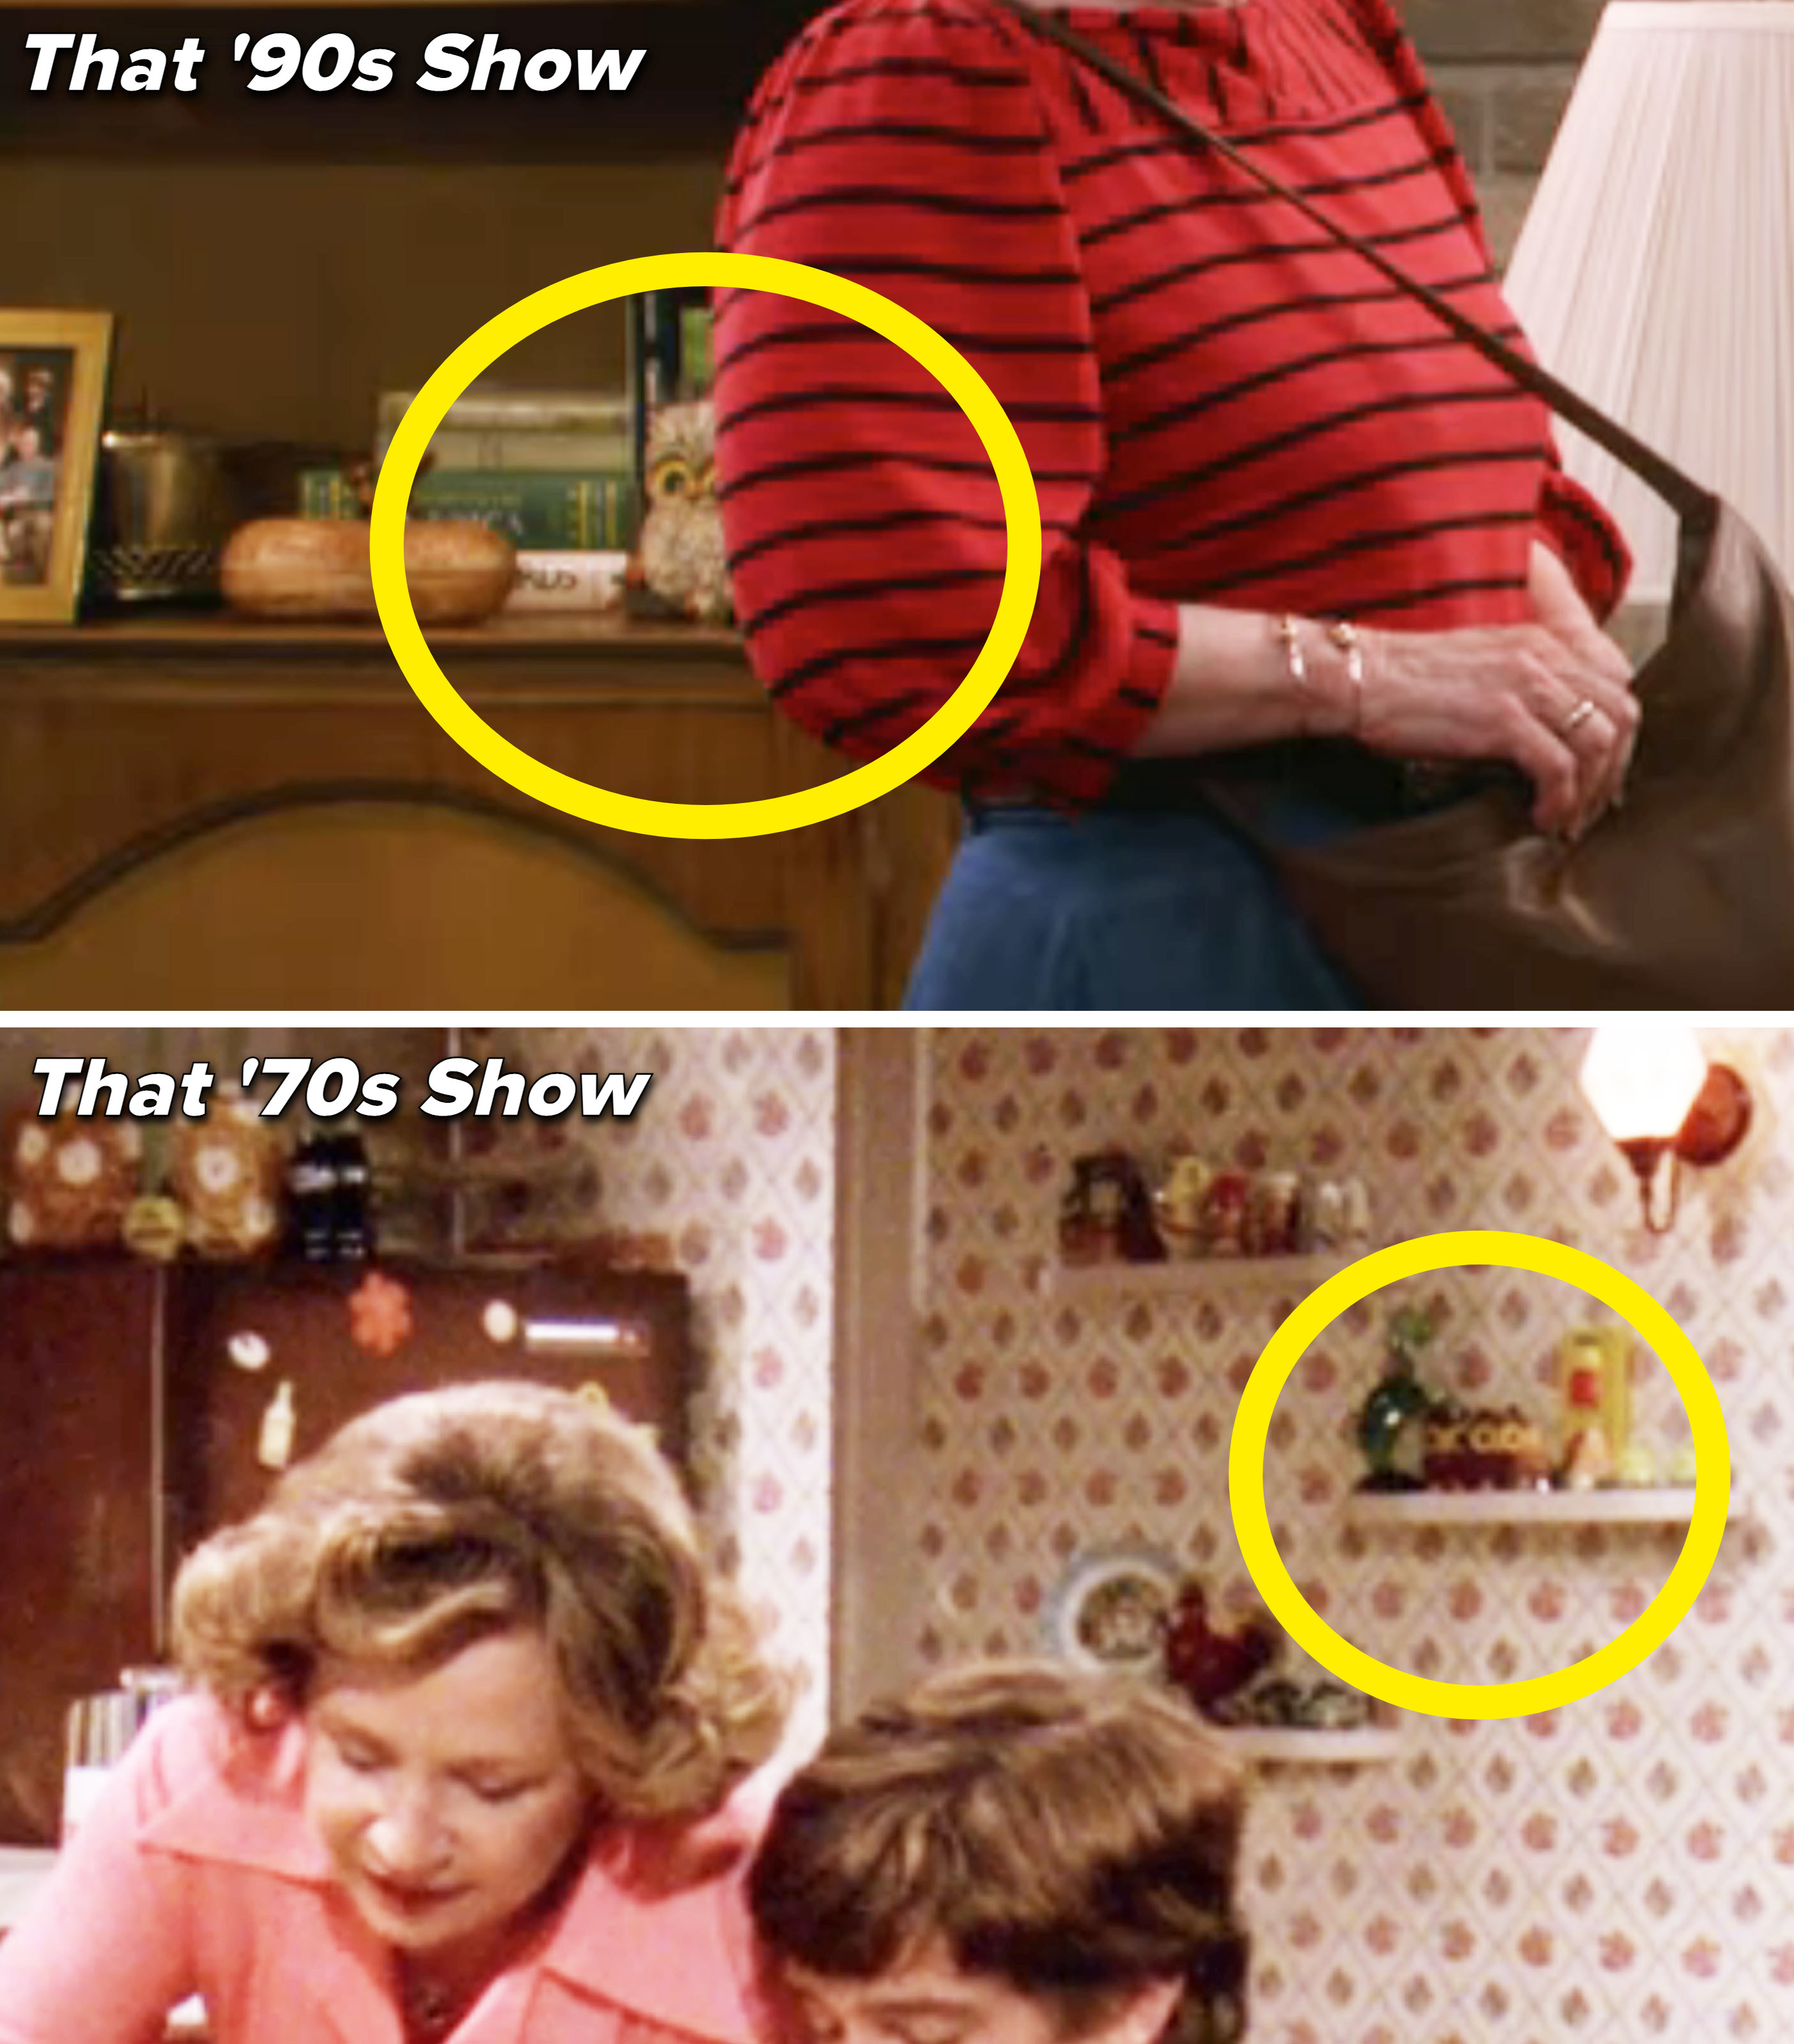 The owl on a piece of furniture in That &#x27;90s Show and on a small wall shelf in That &#x27;70s Show